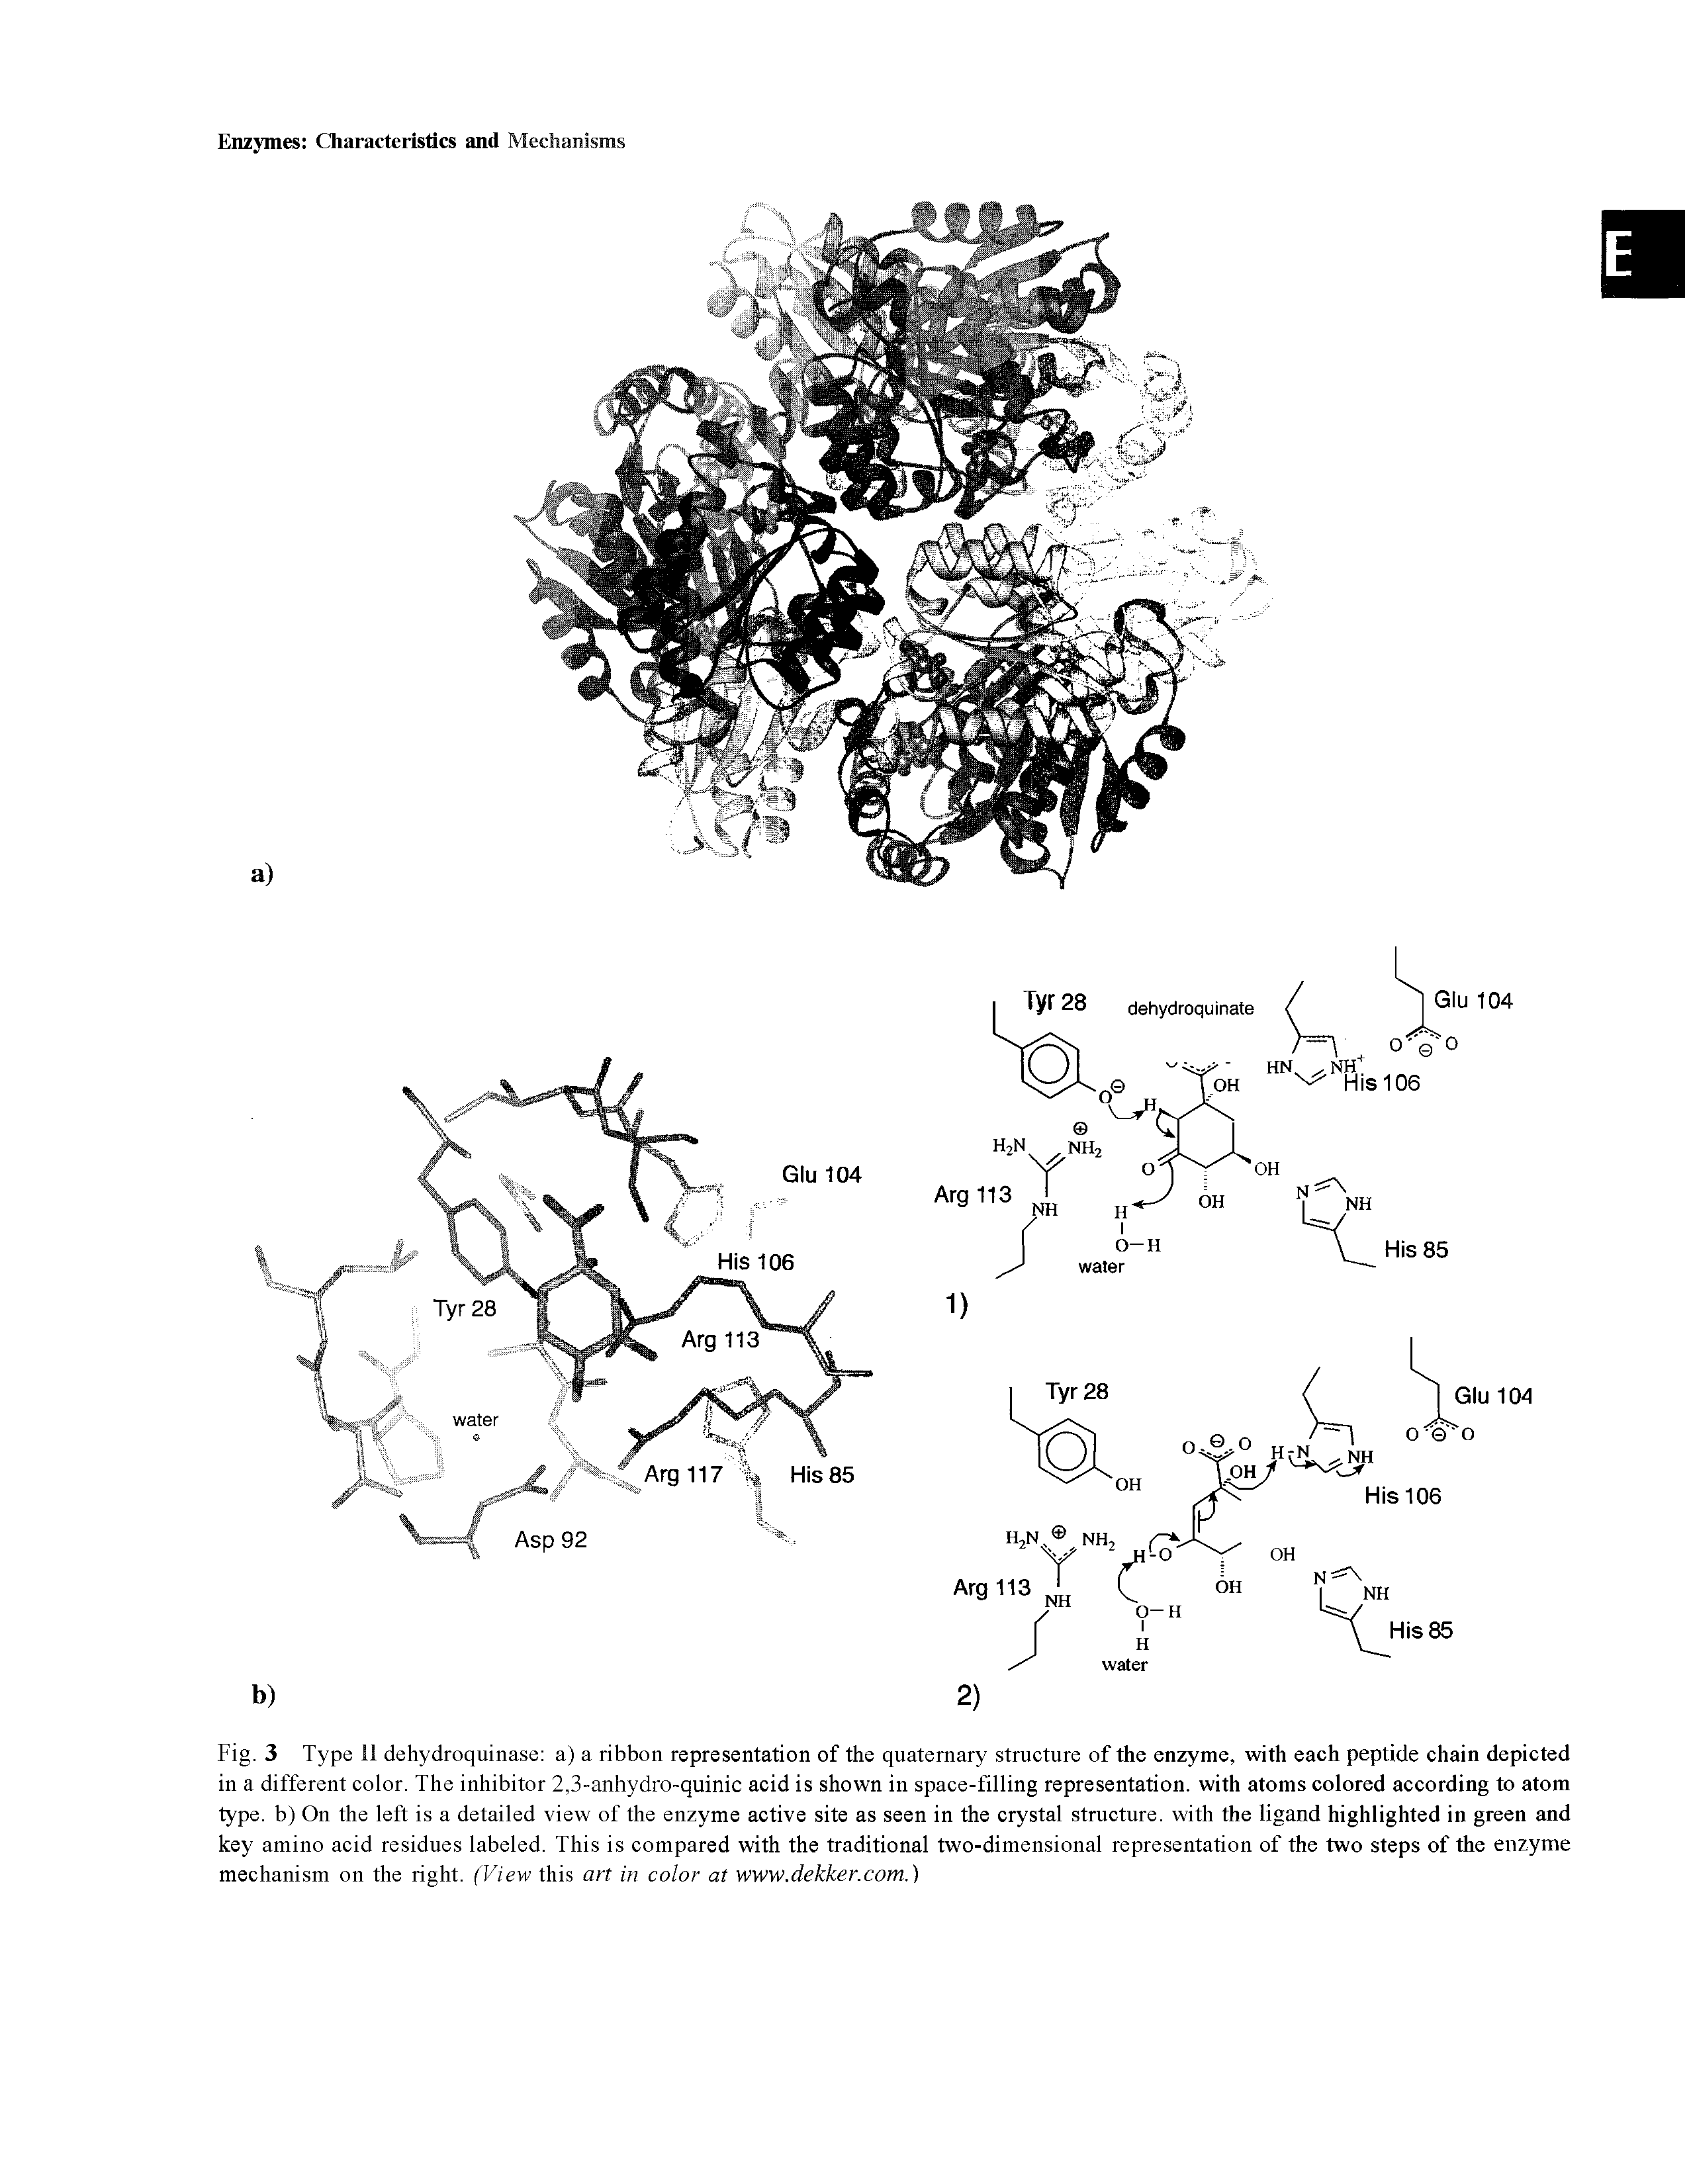 Fig. 3 Type 11 dehydroquinase a) a ribbon representation of the quaternary structure of the enzyme, with each peptide chain depicted in a different color. The inhibitor 2,3-anhydro-quinic acid is shown in space-filling representation, with atoms colored according to atom type, b) On the left is a detailed view of the enzyme active site as seen in the crystal structure, with the ligand highlighted in green and key amino acid residues labeled. This is compared with the traditional two-dimensional representation of the two steps of the enzyme mechanism on the right. (View this an in color at WWW.dekker.com.)...